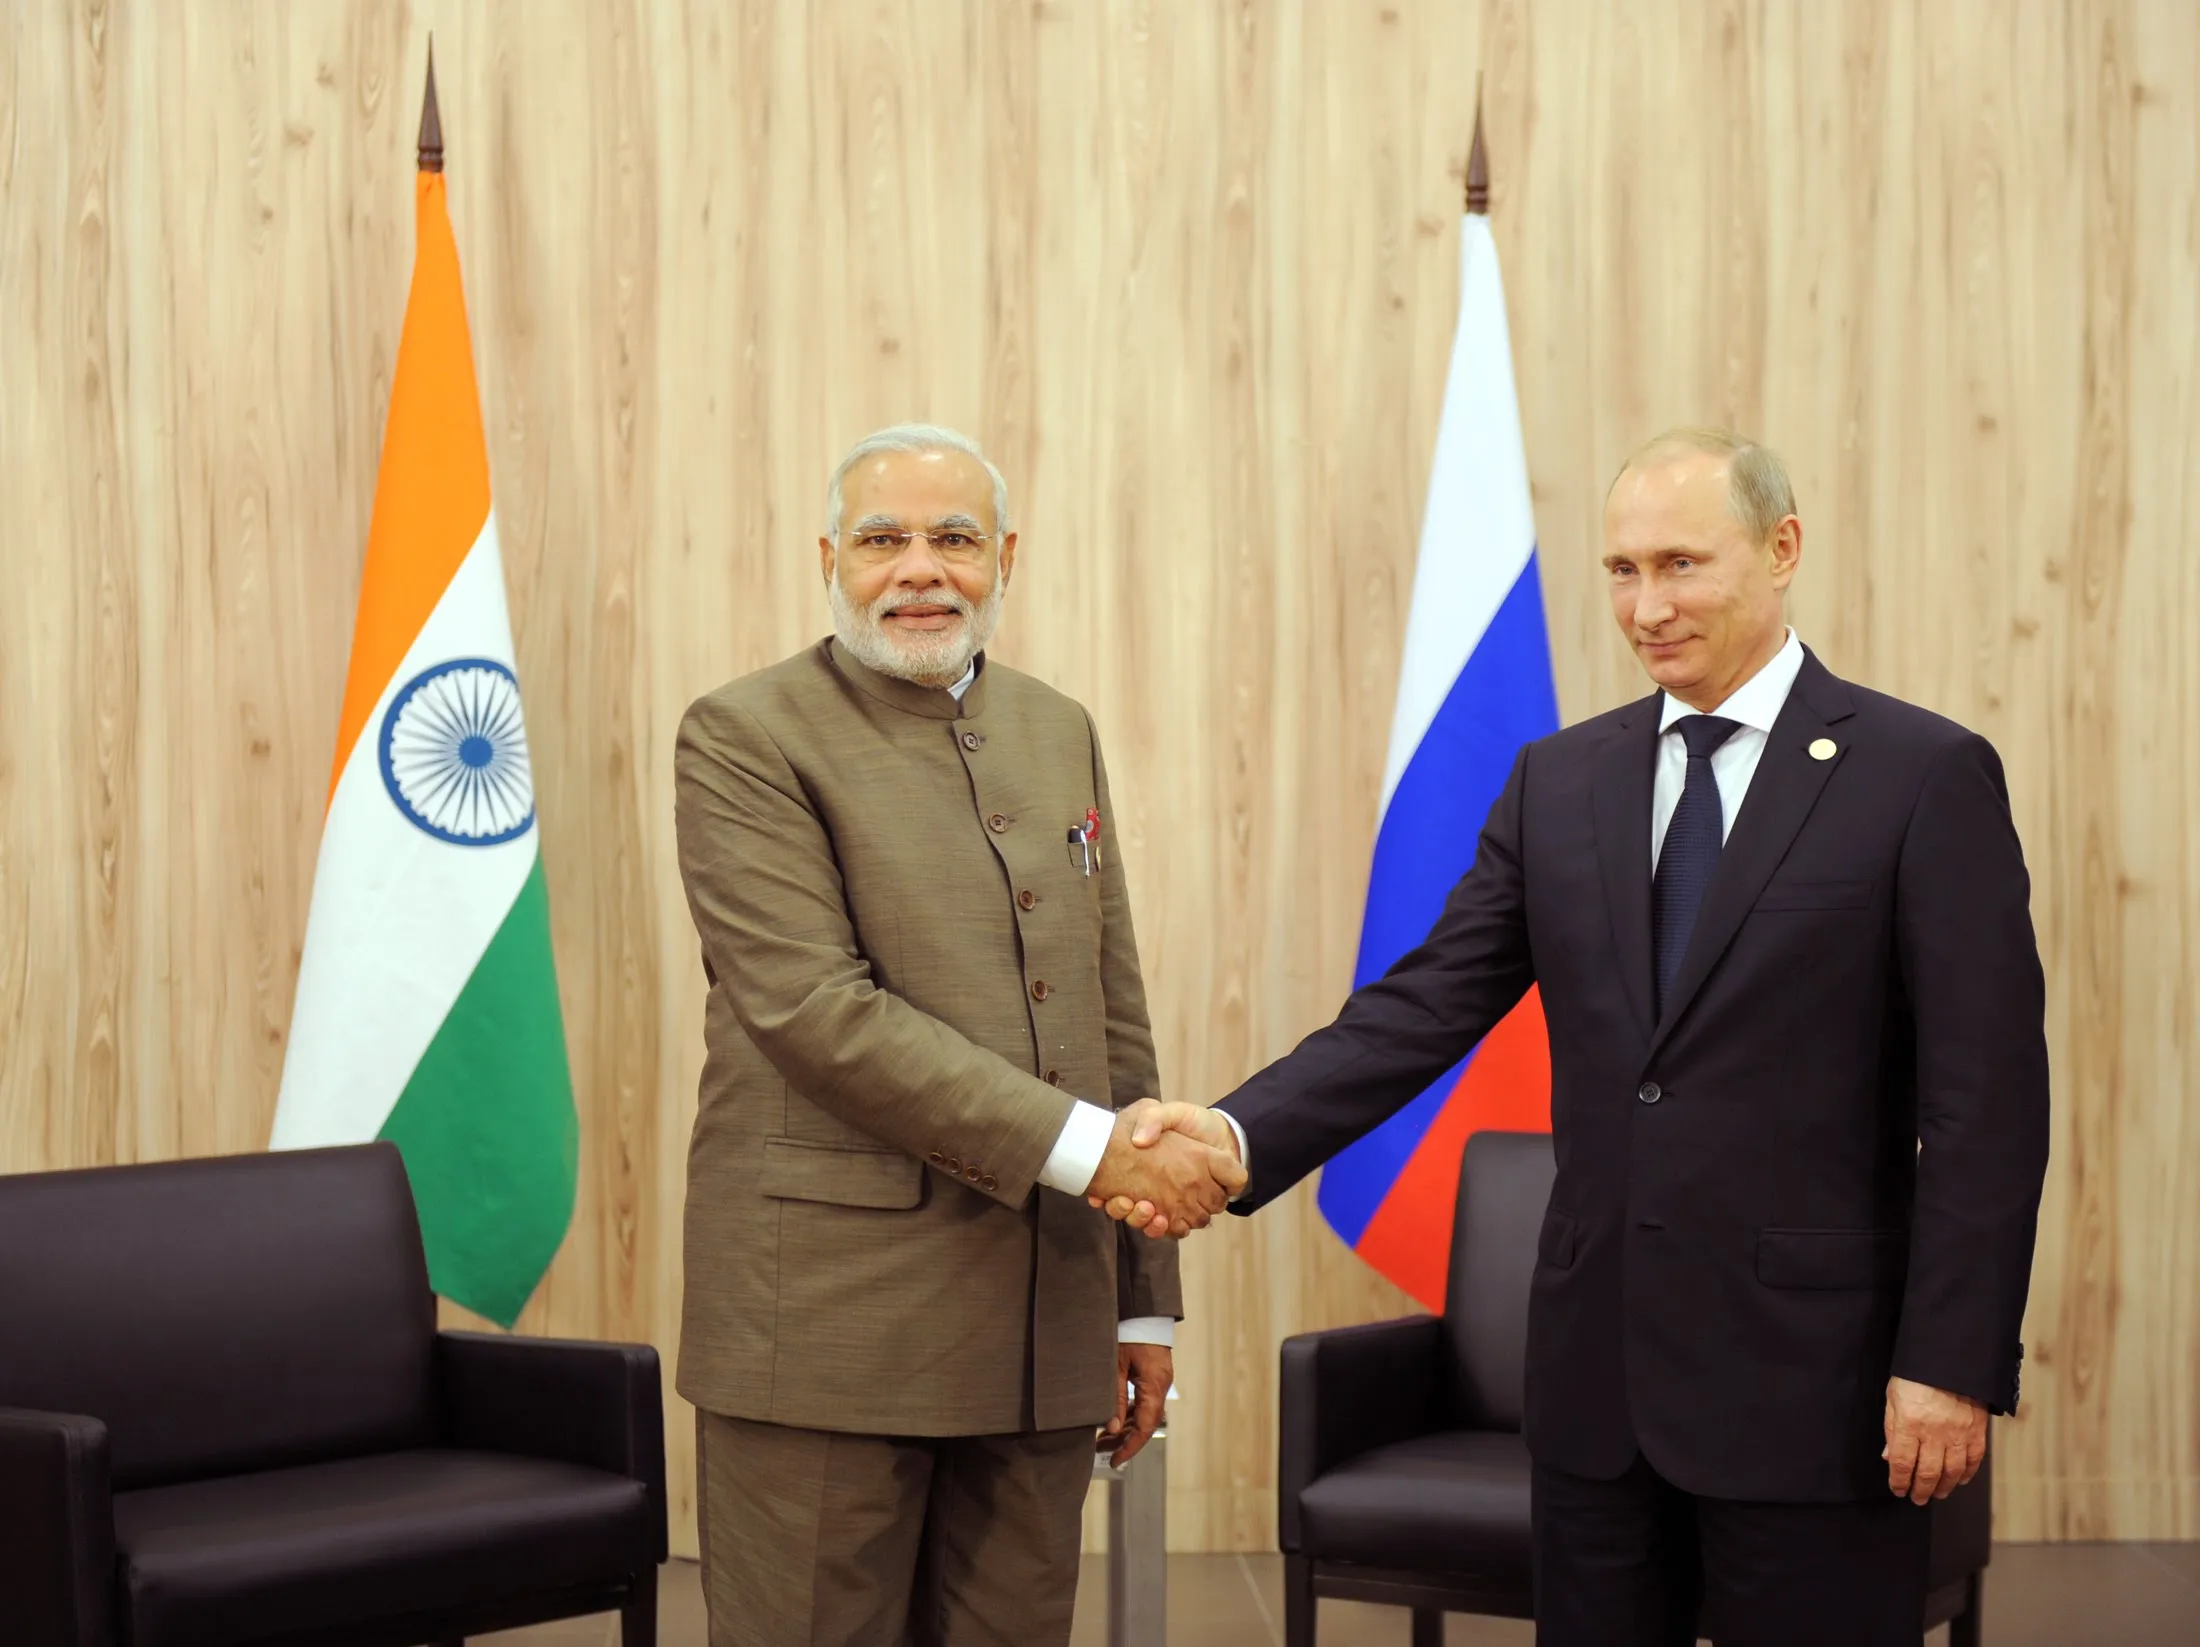 India and Russia struggle to regain past glow  